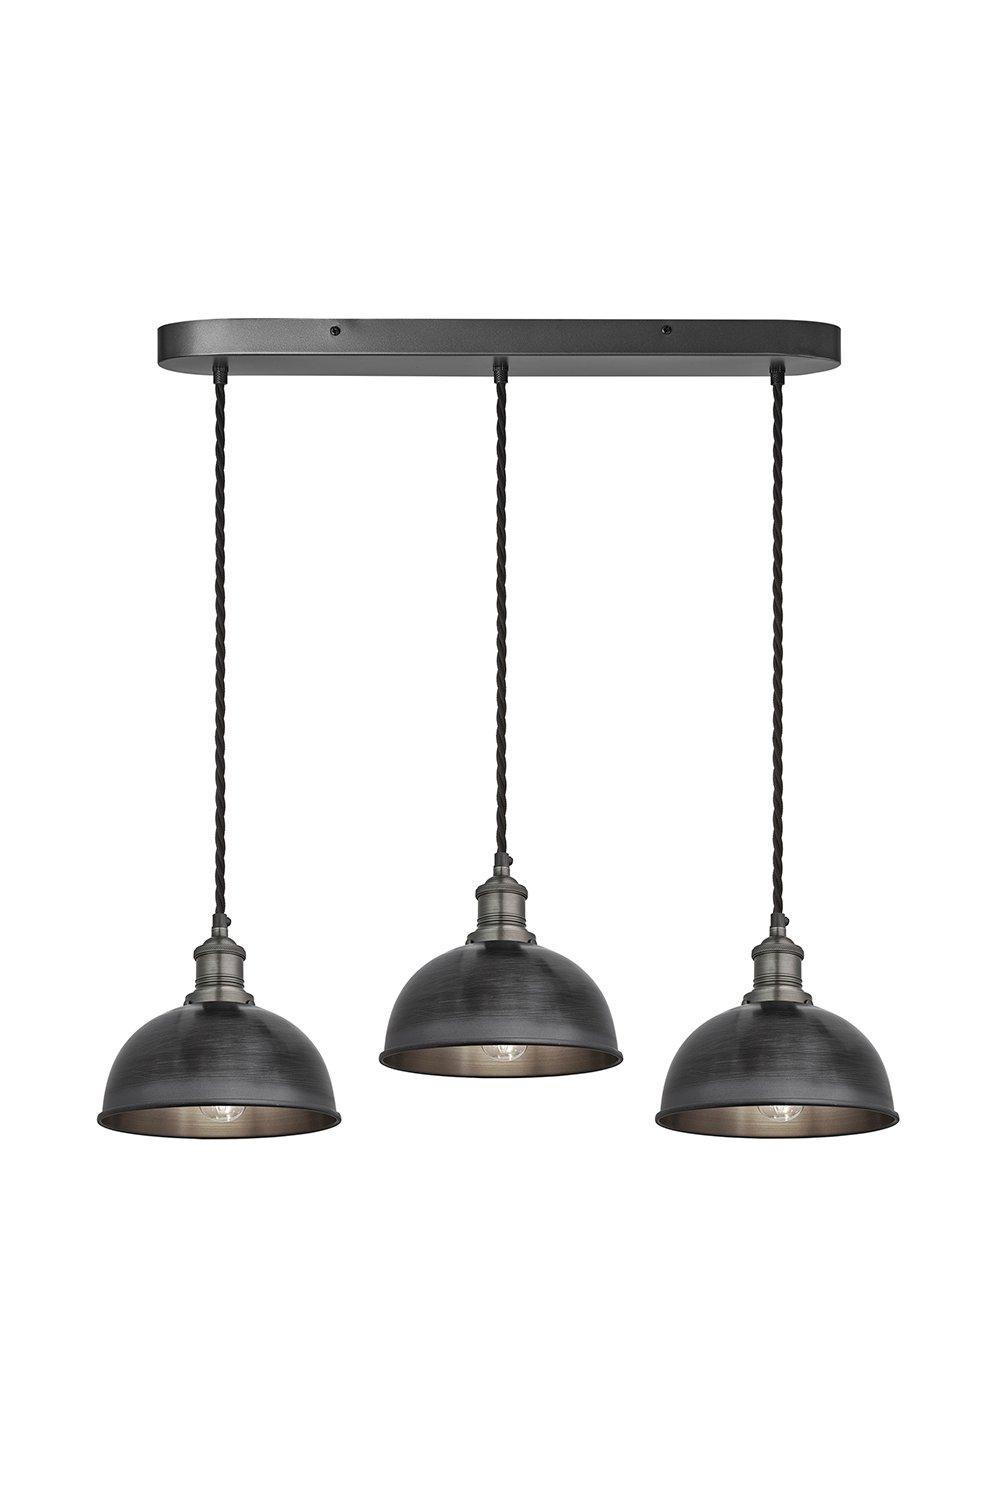 Brooklyn Dome 3 Wire Oval Cluster Lights, 8 inch, Pewter, Pewter holder